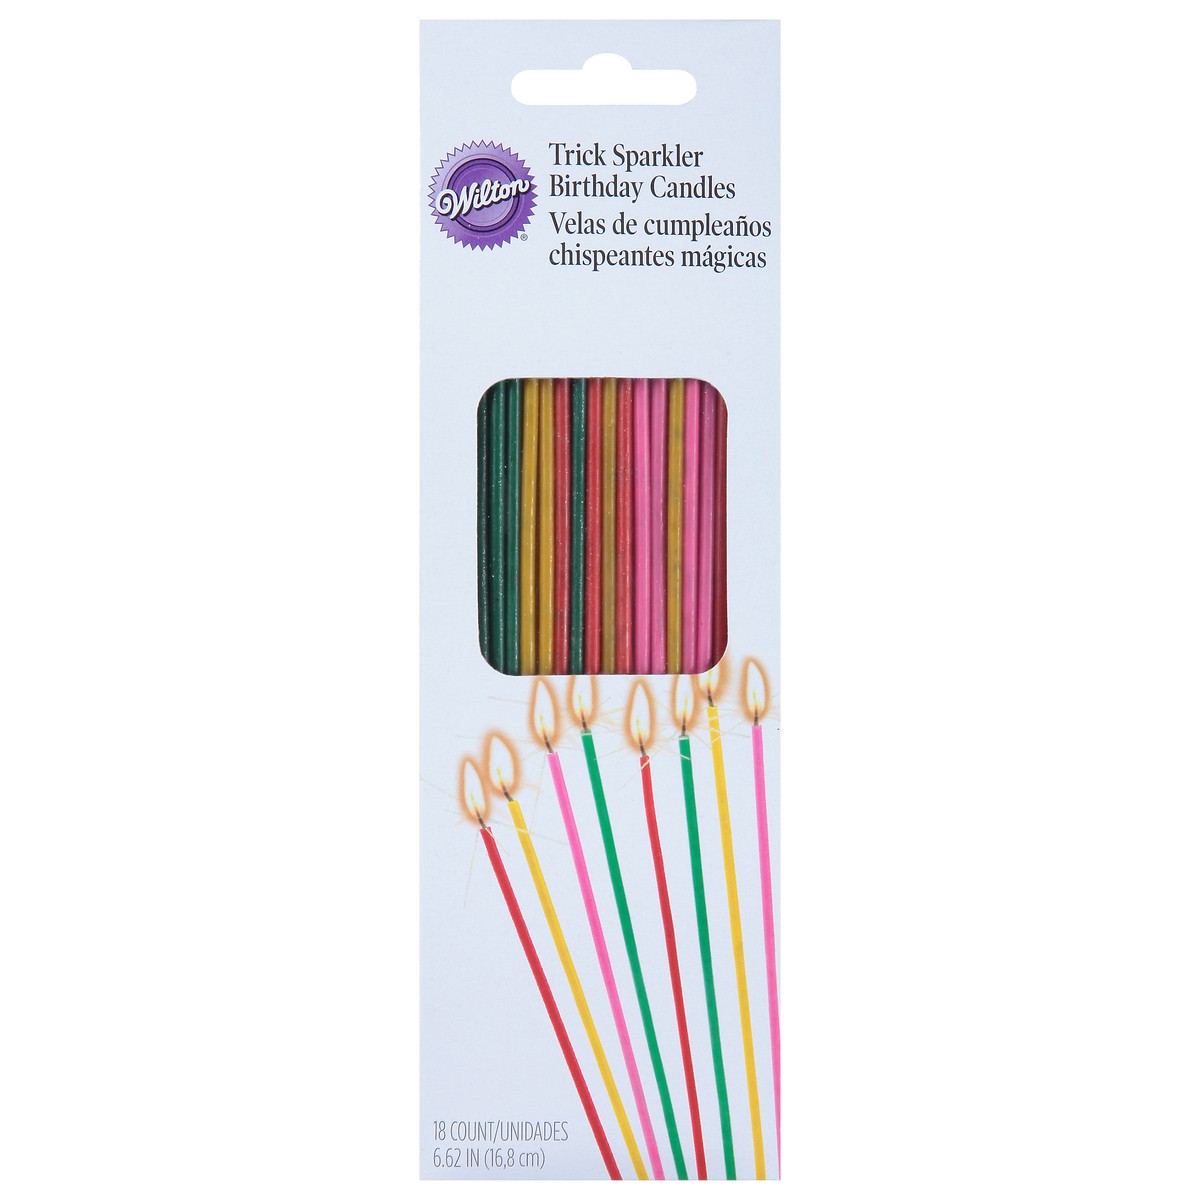 slide 1 of 9, Wilton 6.62 Inches Trick Sparkler Birthday Candles 18 ea, 18 ct